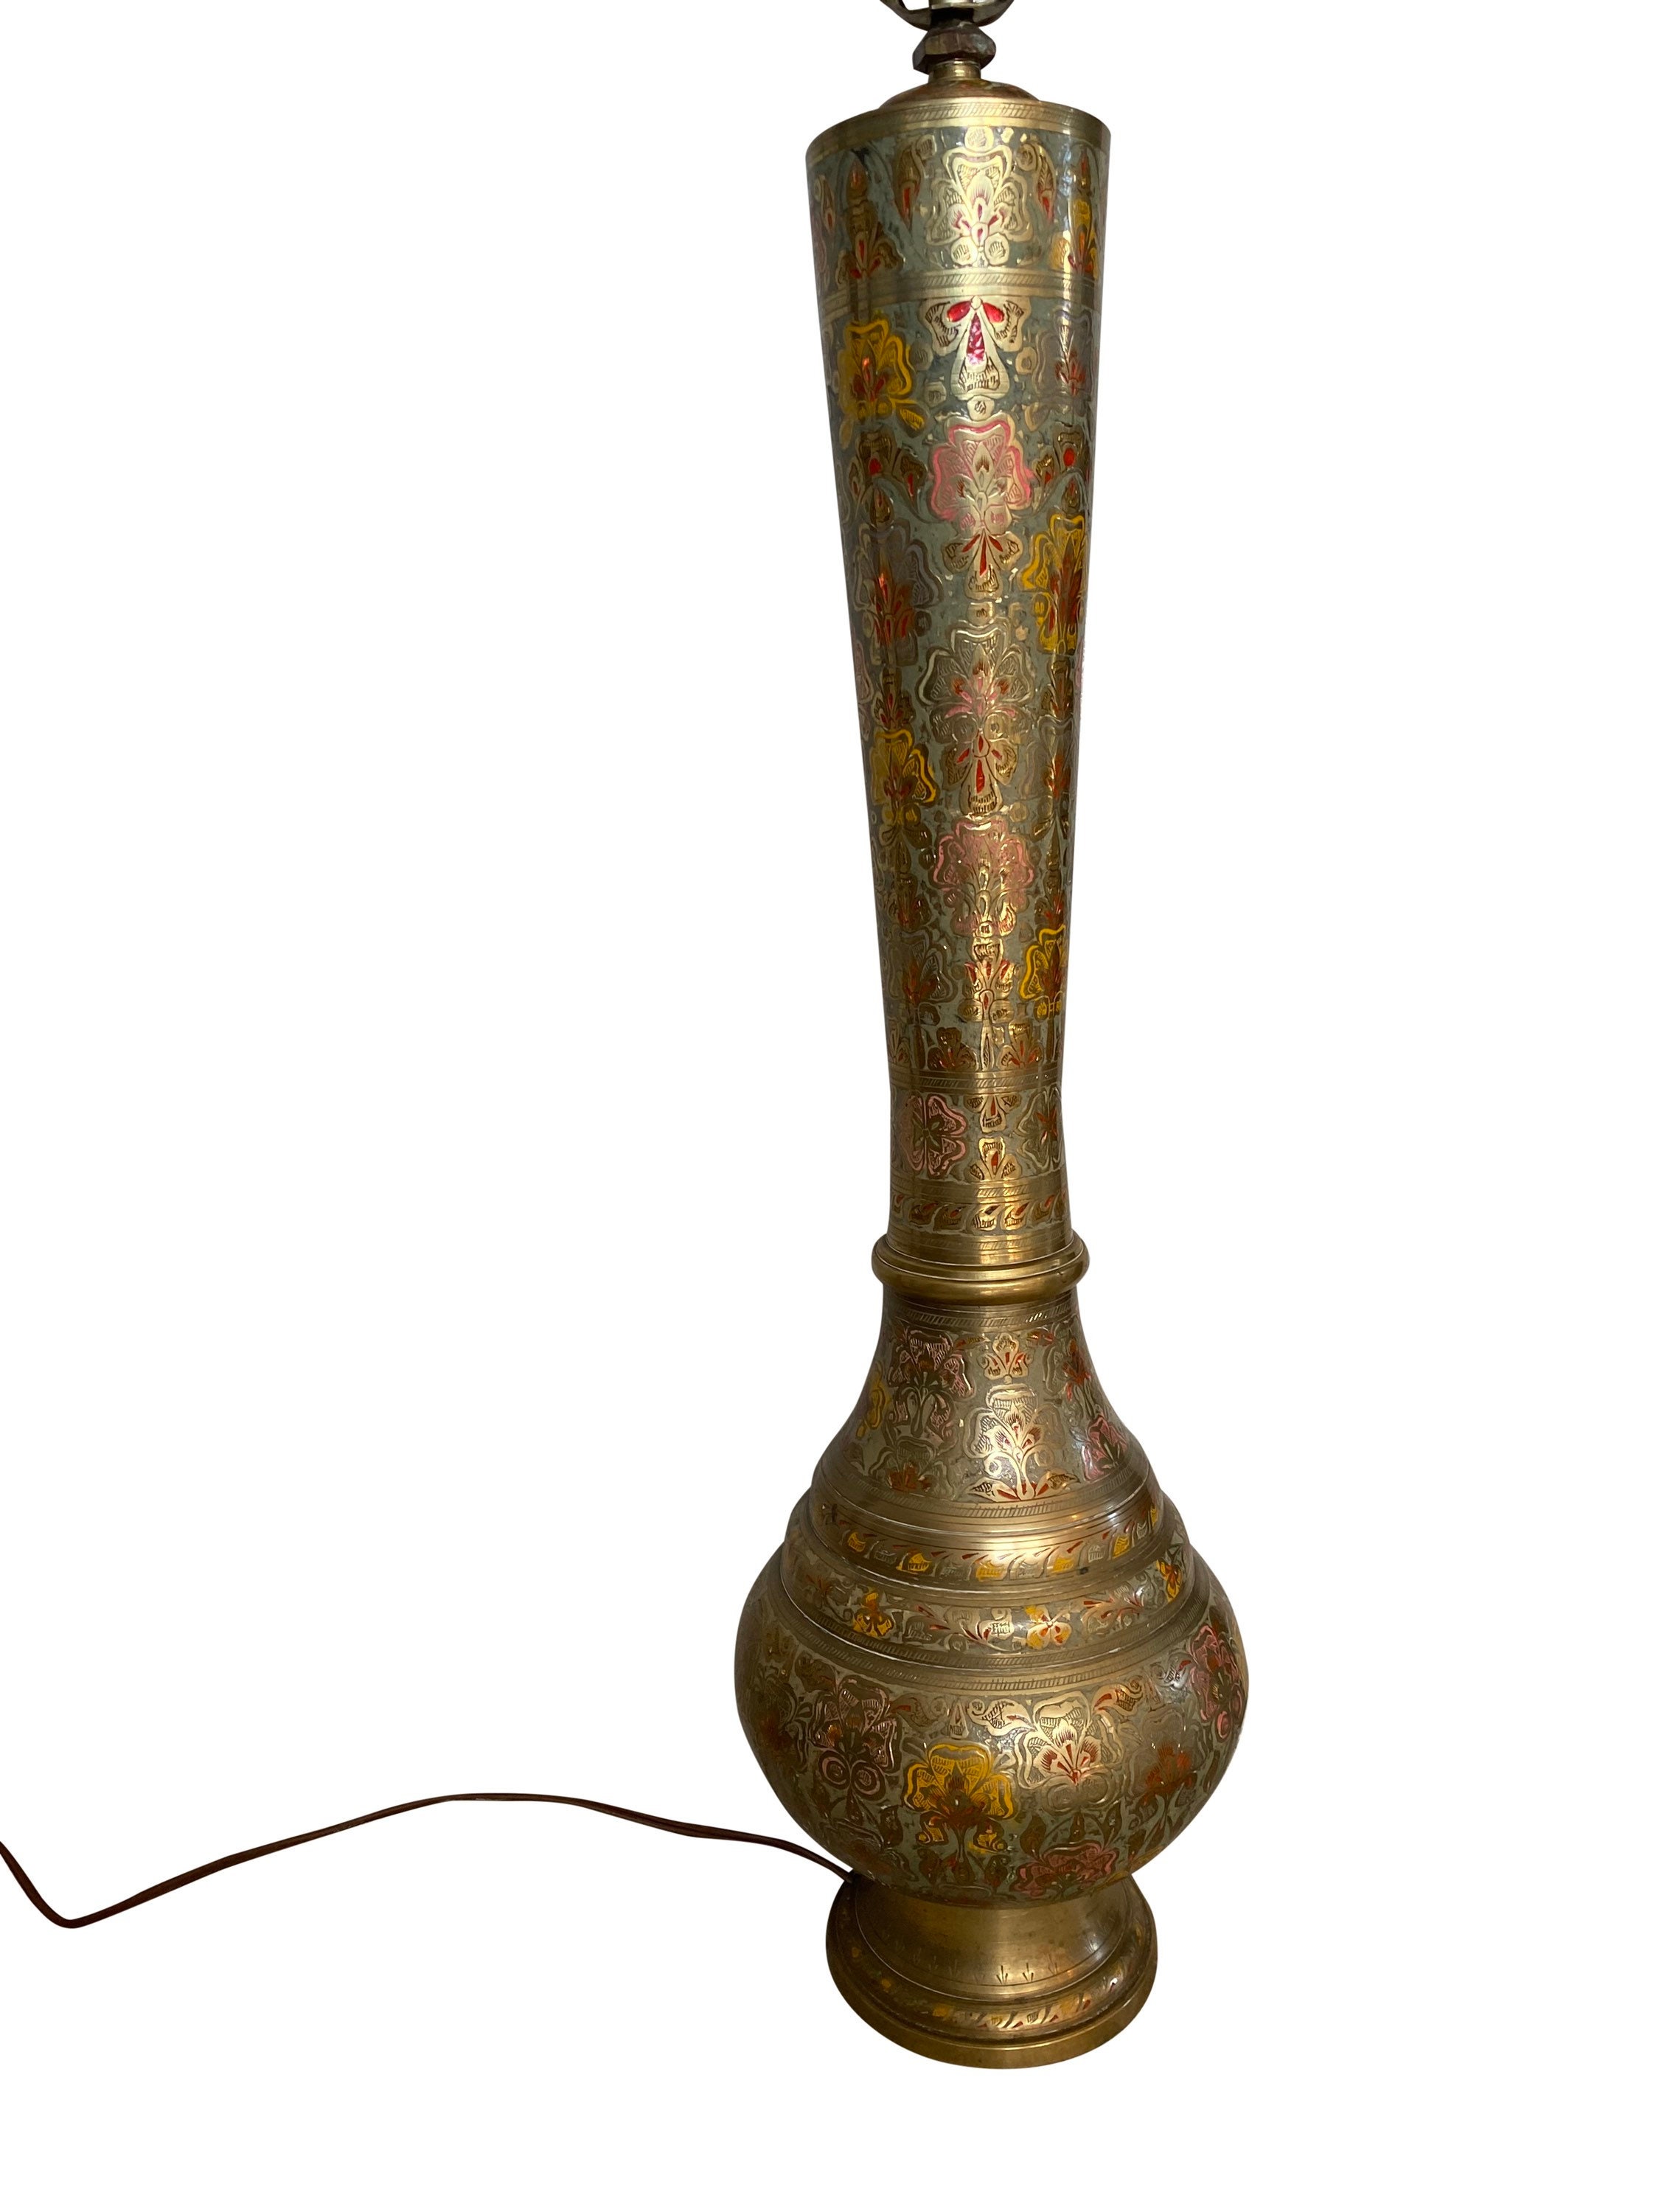 Turkish Vintage Tall Brass Lamp /middle Eastern Ornate Etched